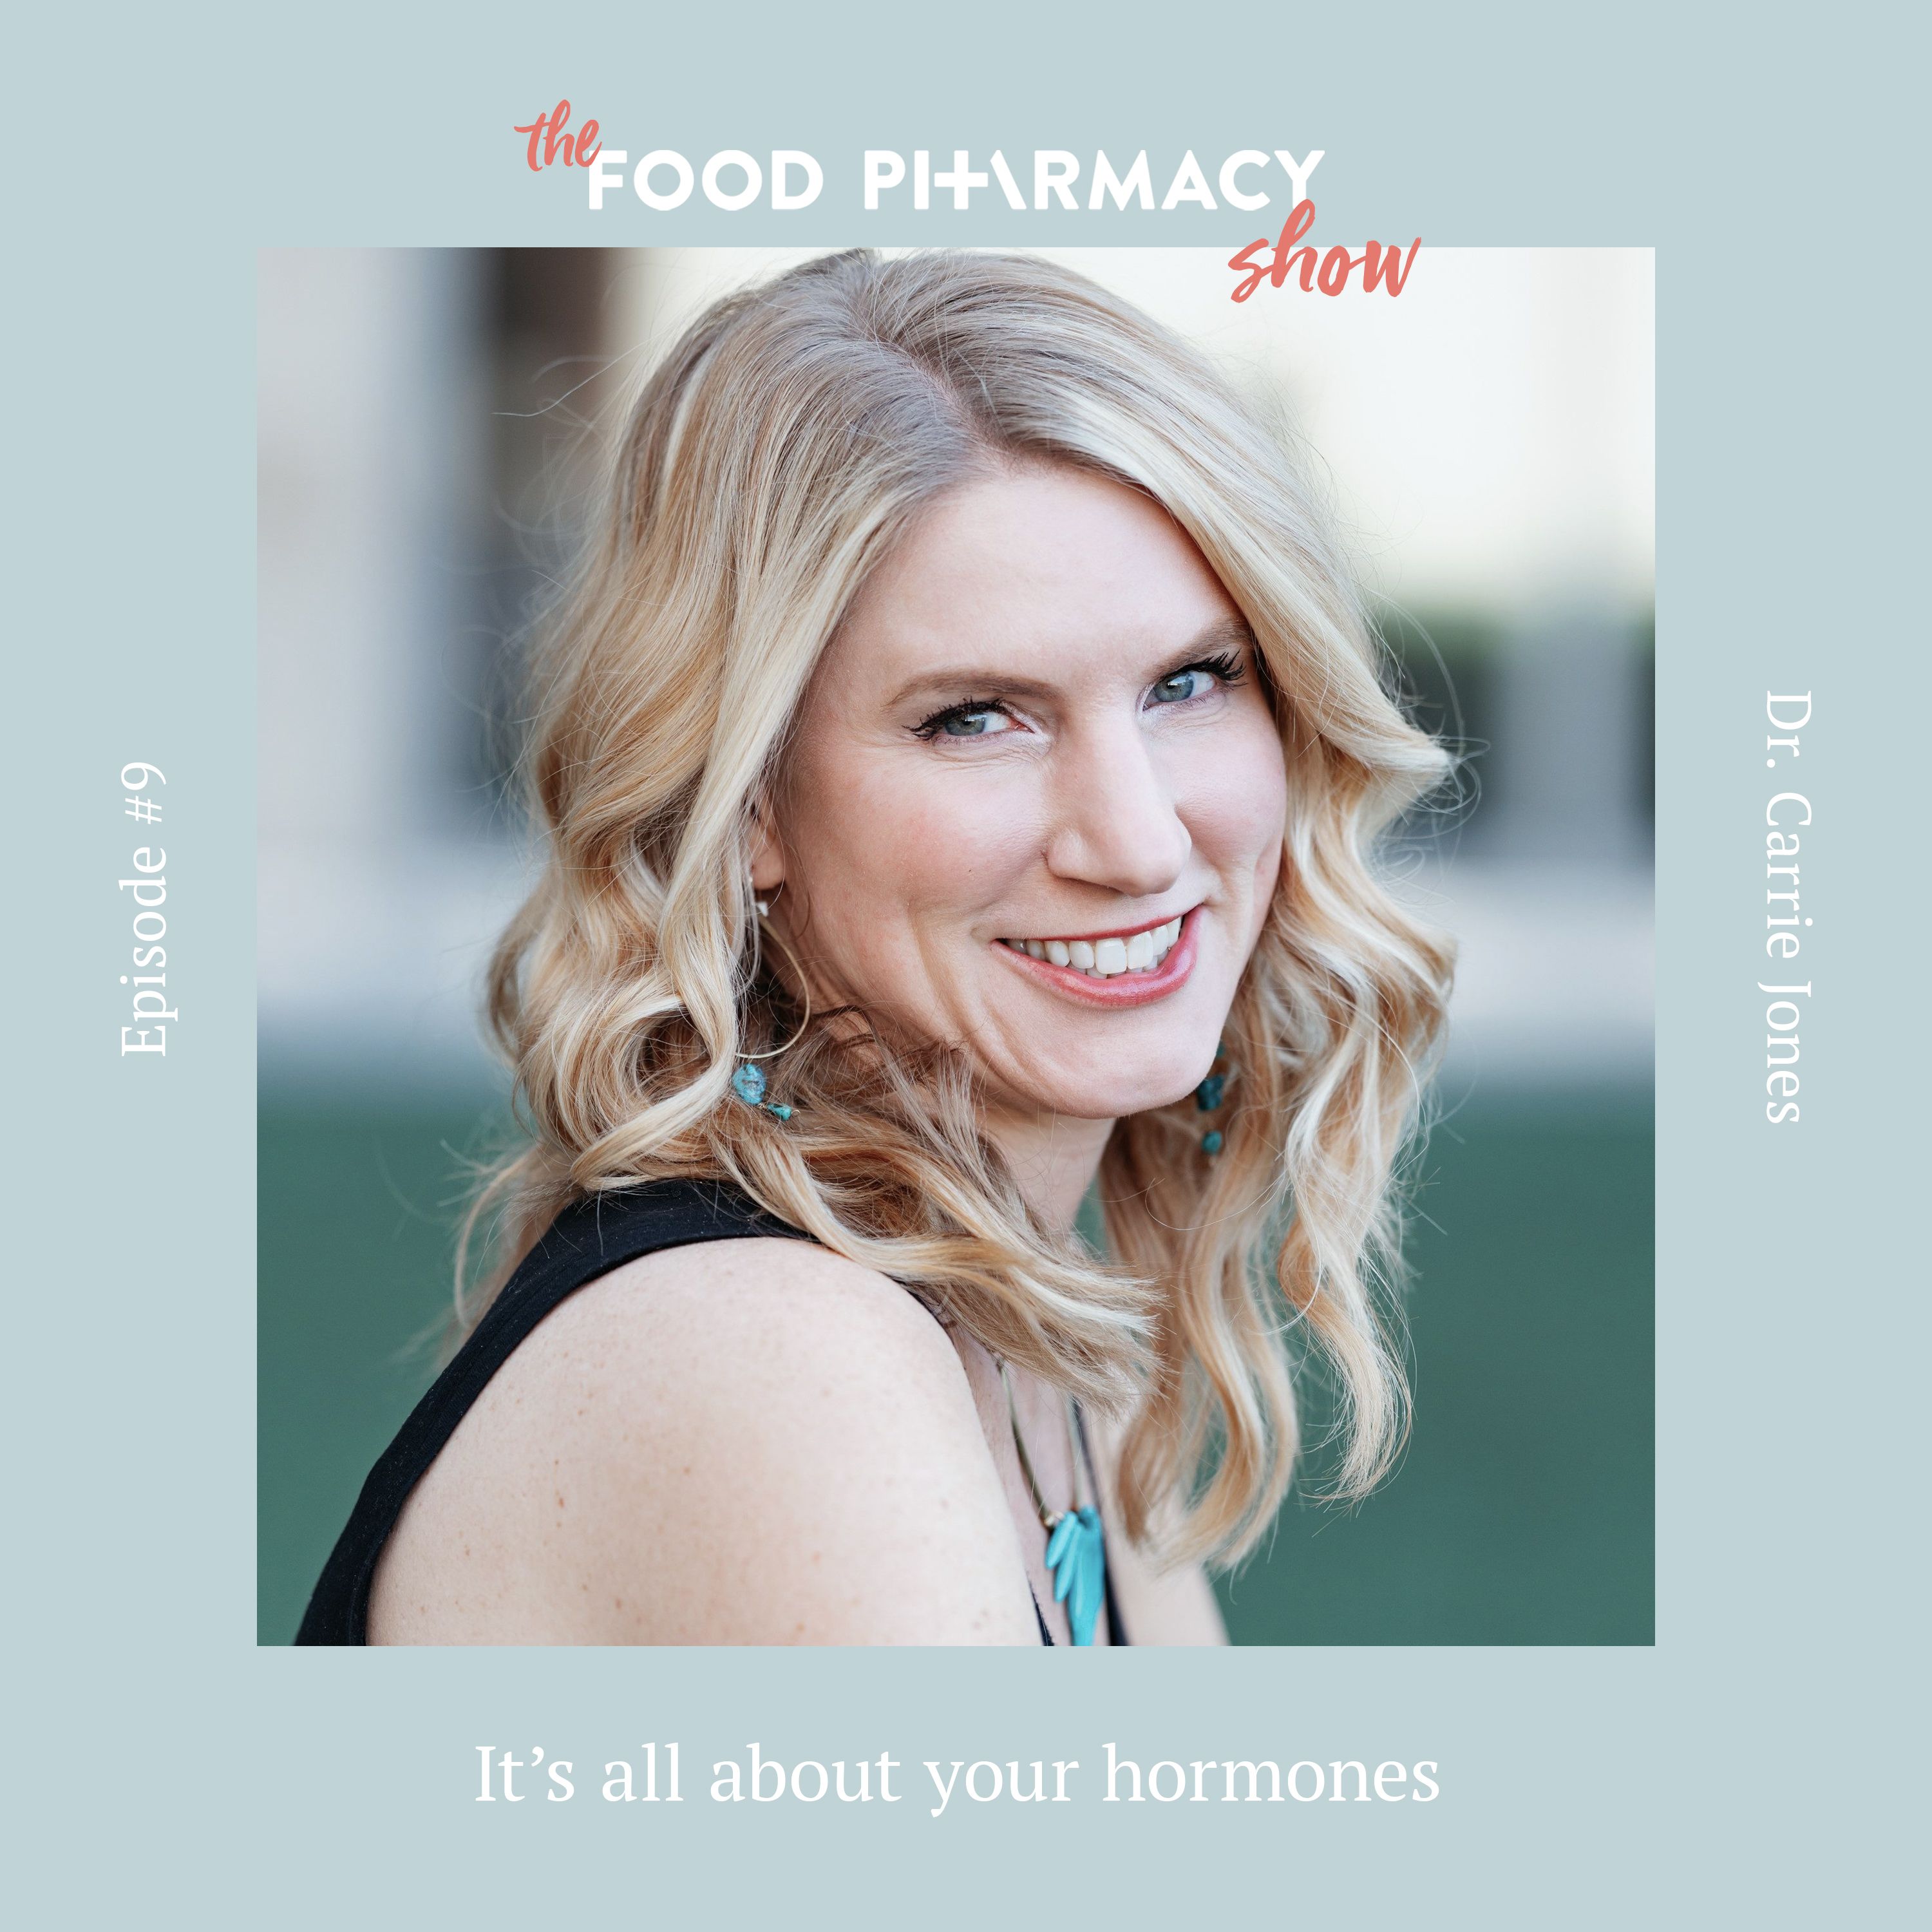 9. Dr Carrie Jones - it's all about your hormones